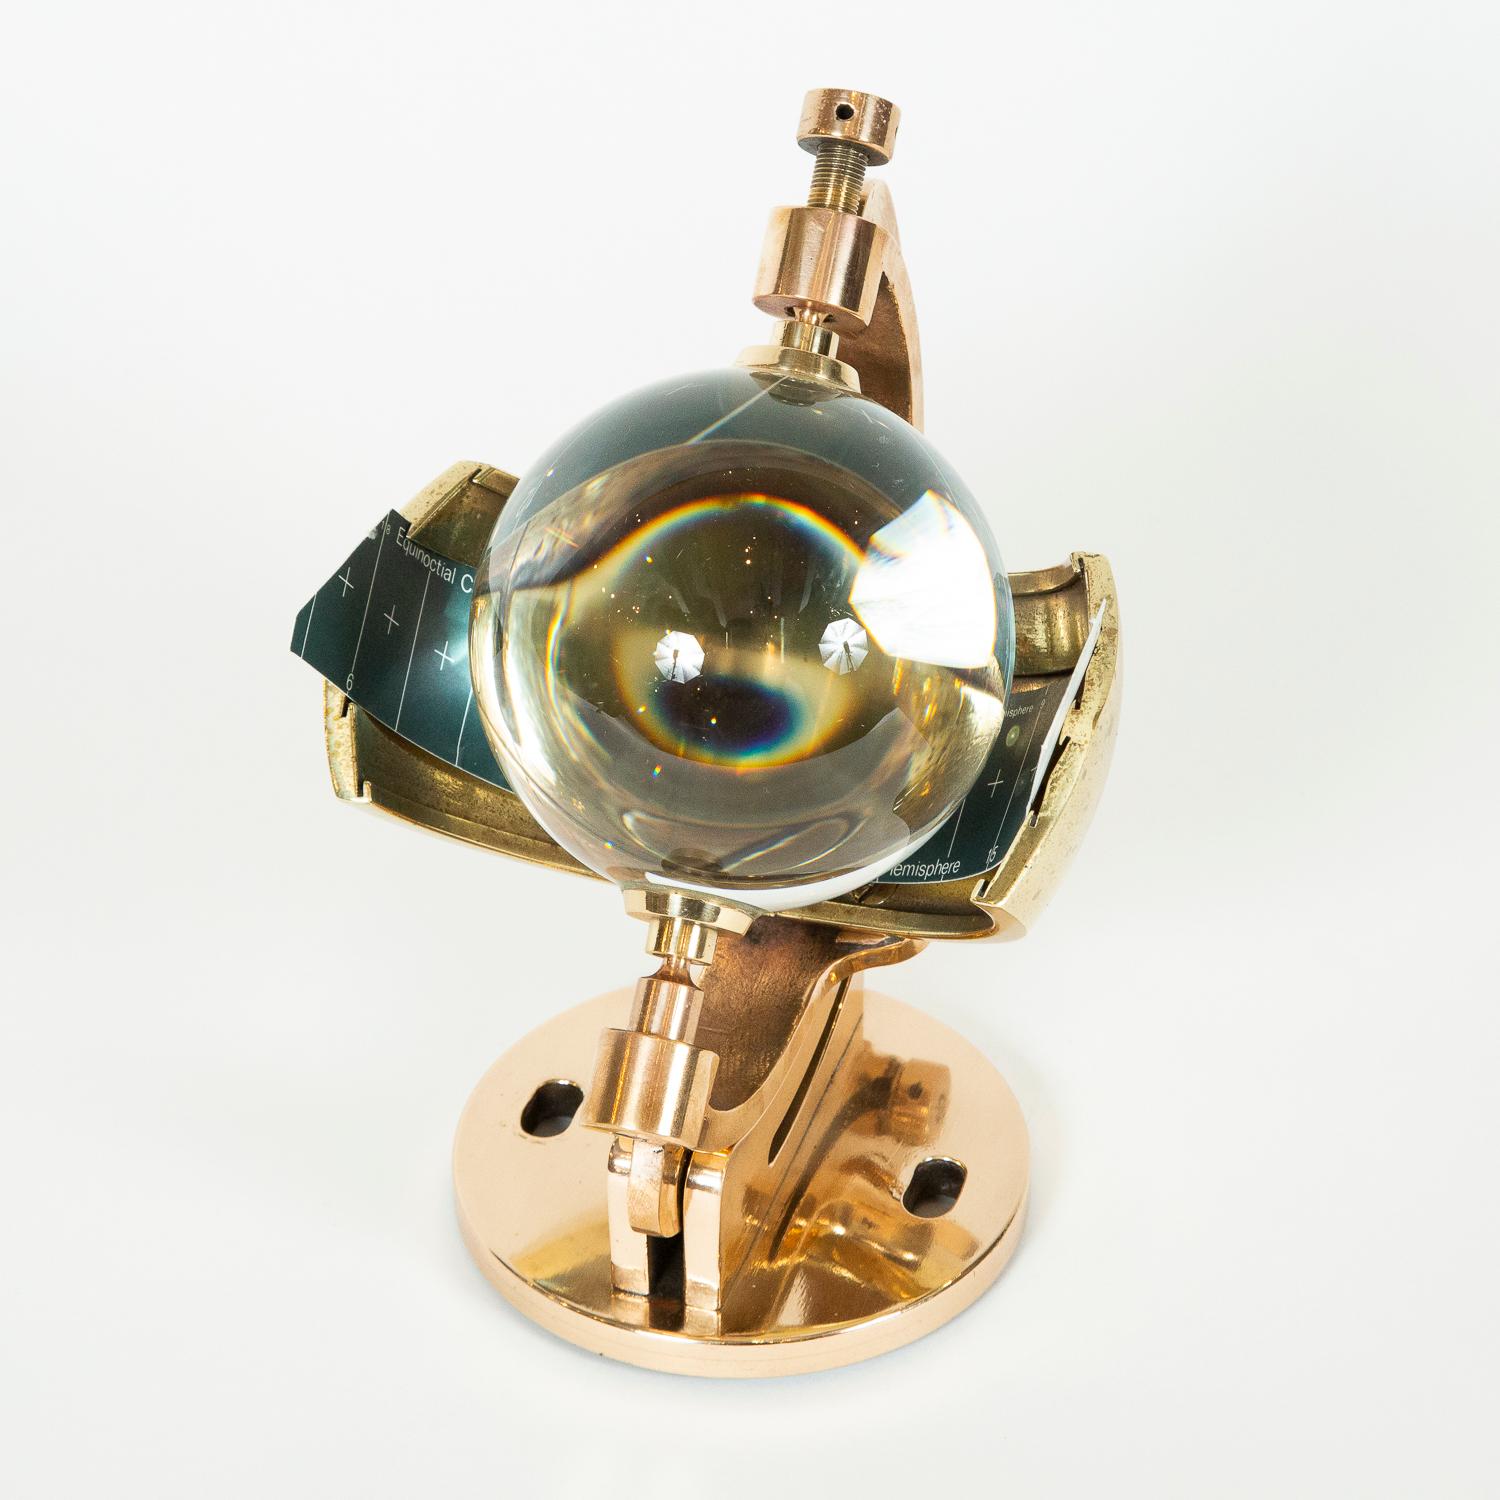 Campbell–Stokes Sunshine Recorder by Casella of London 1